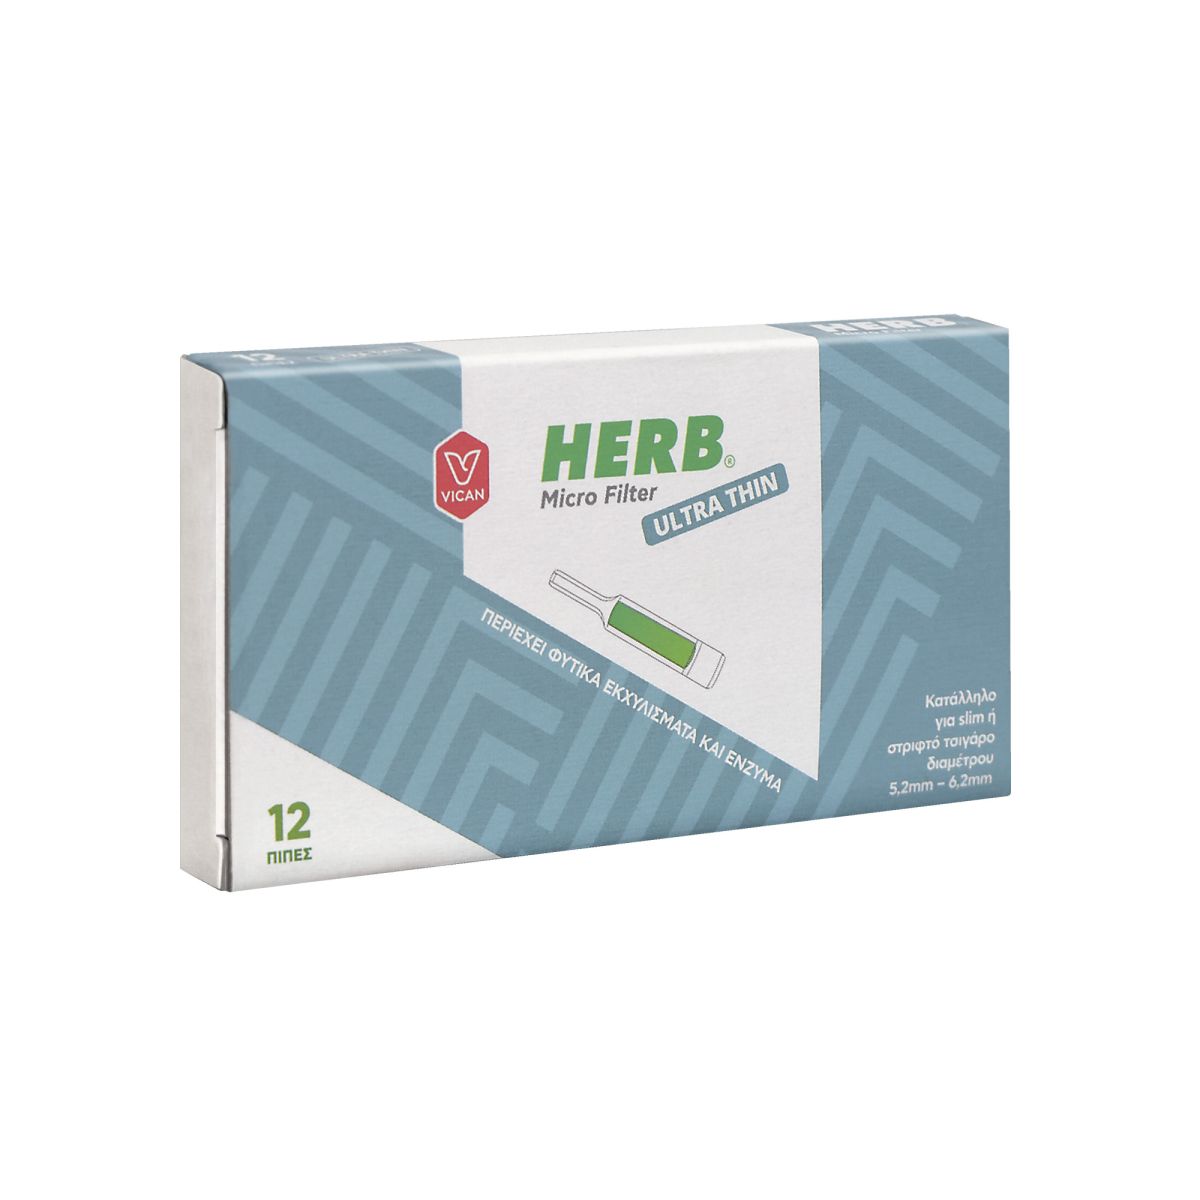 HERB MICRO FILTER ULTRA THIN